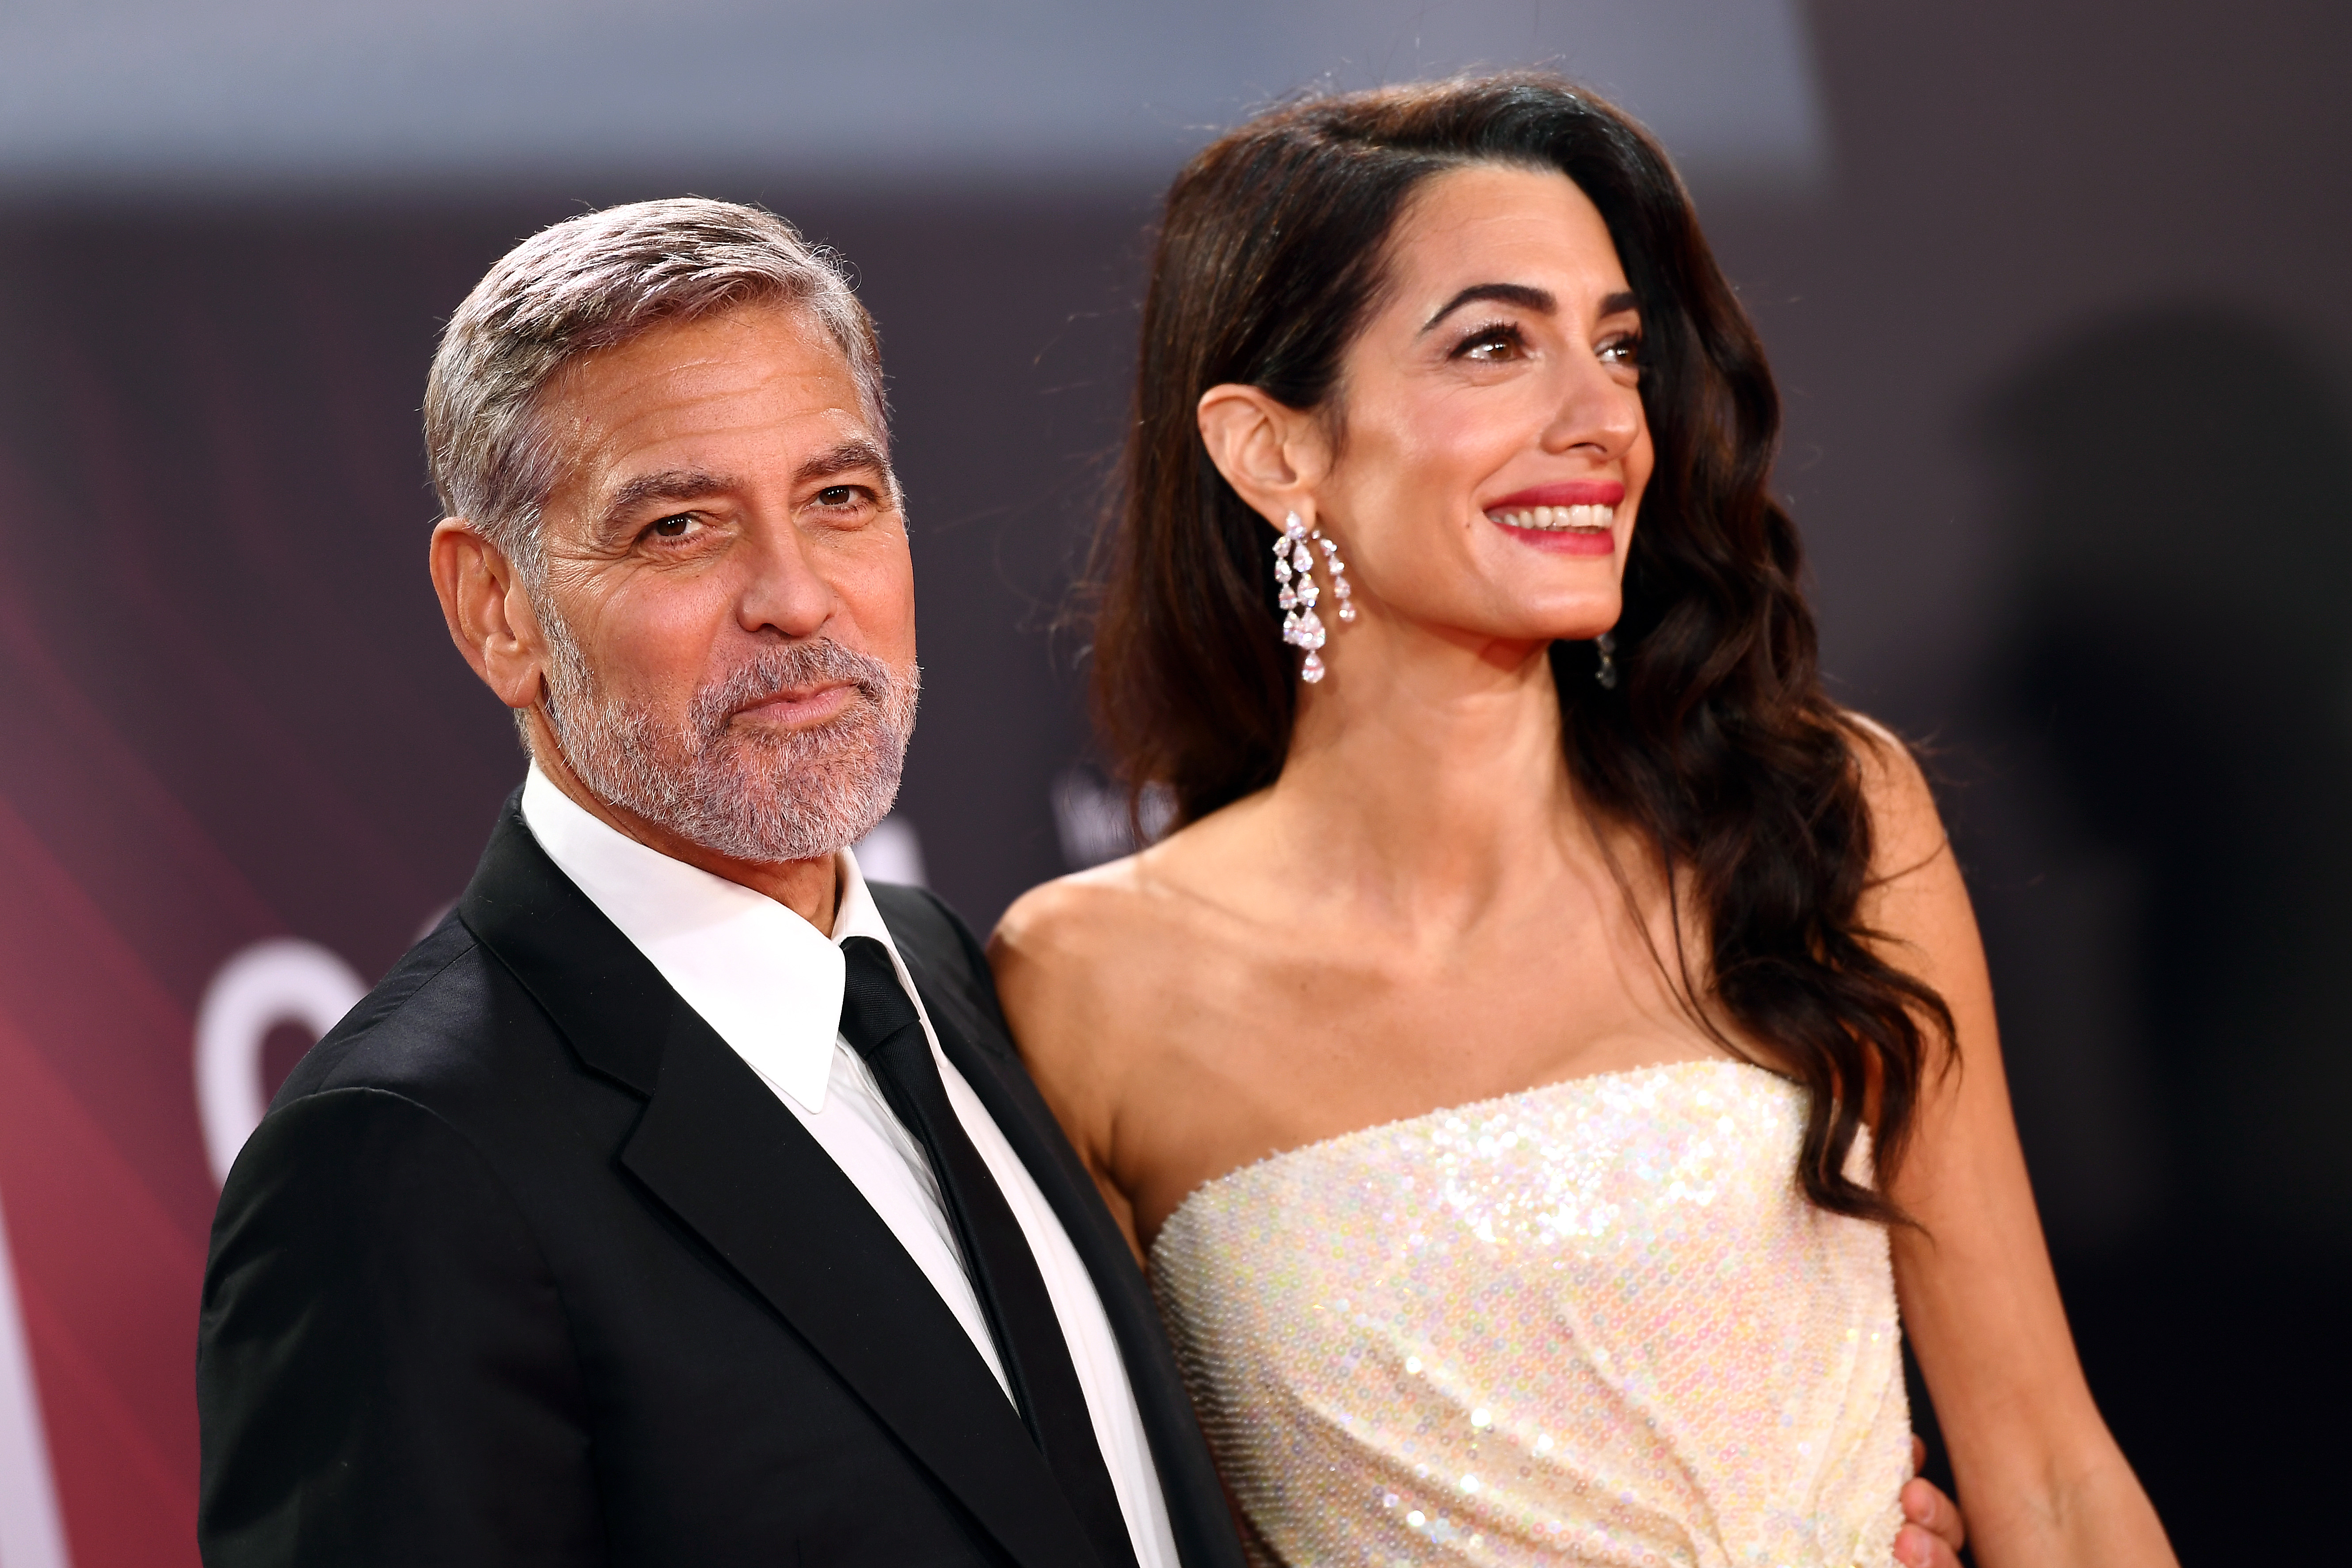 George Clooney and Amal Clooney attend "The Tender Bar" premiere during the 65th BFI London Film Festival at The Royal Festival Hall on October 10, 2021 in London, England | Source: Getty Images